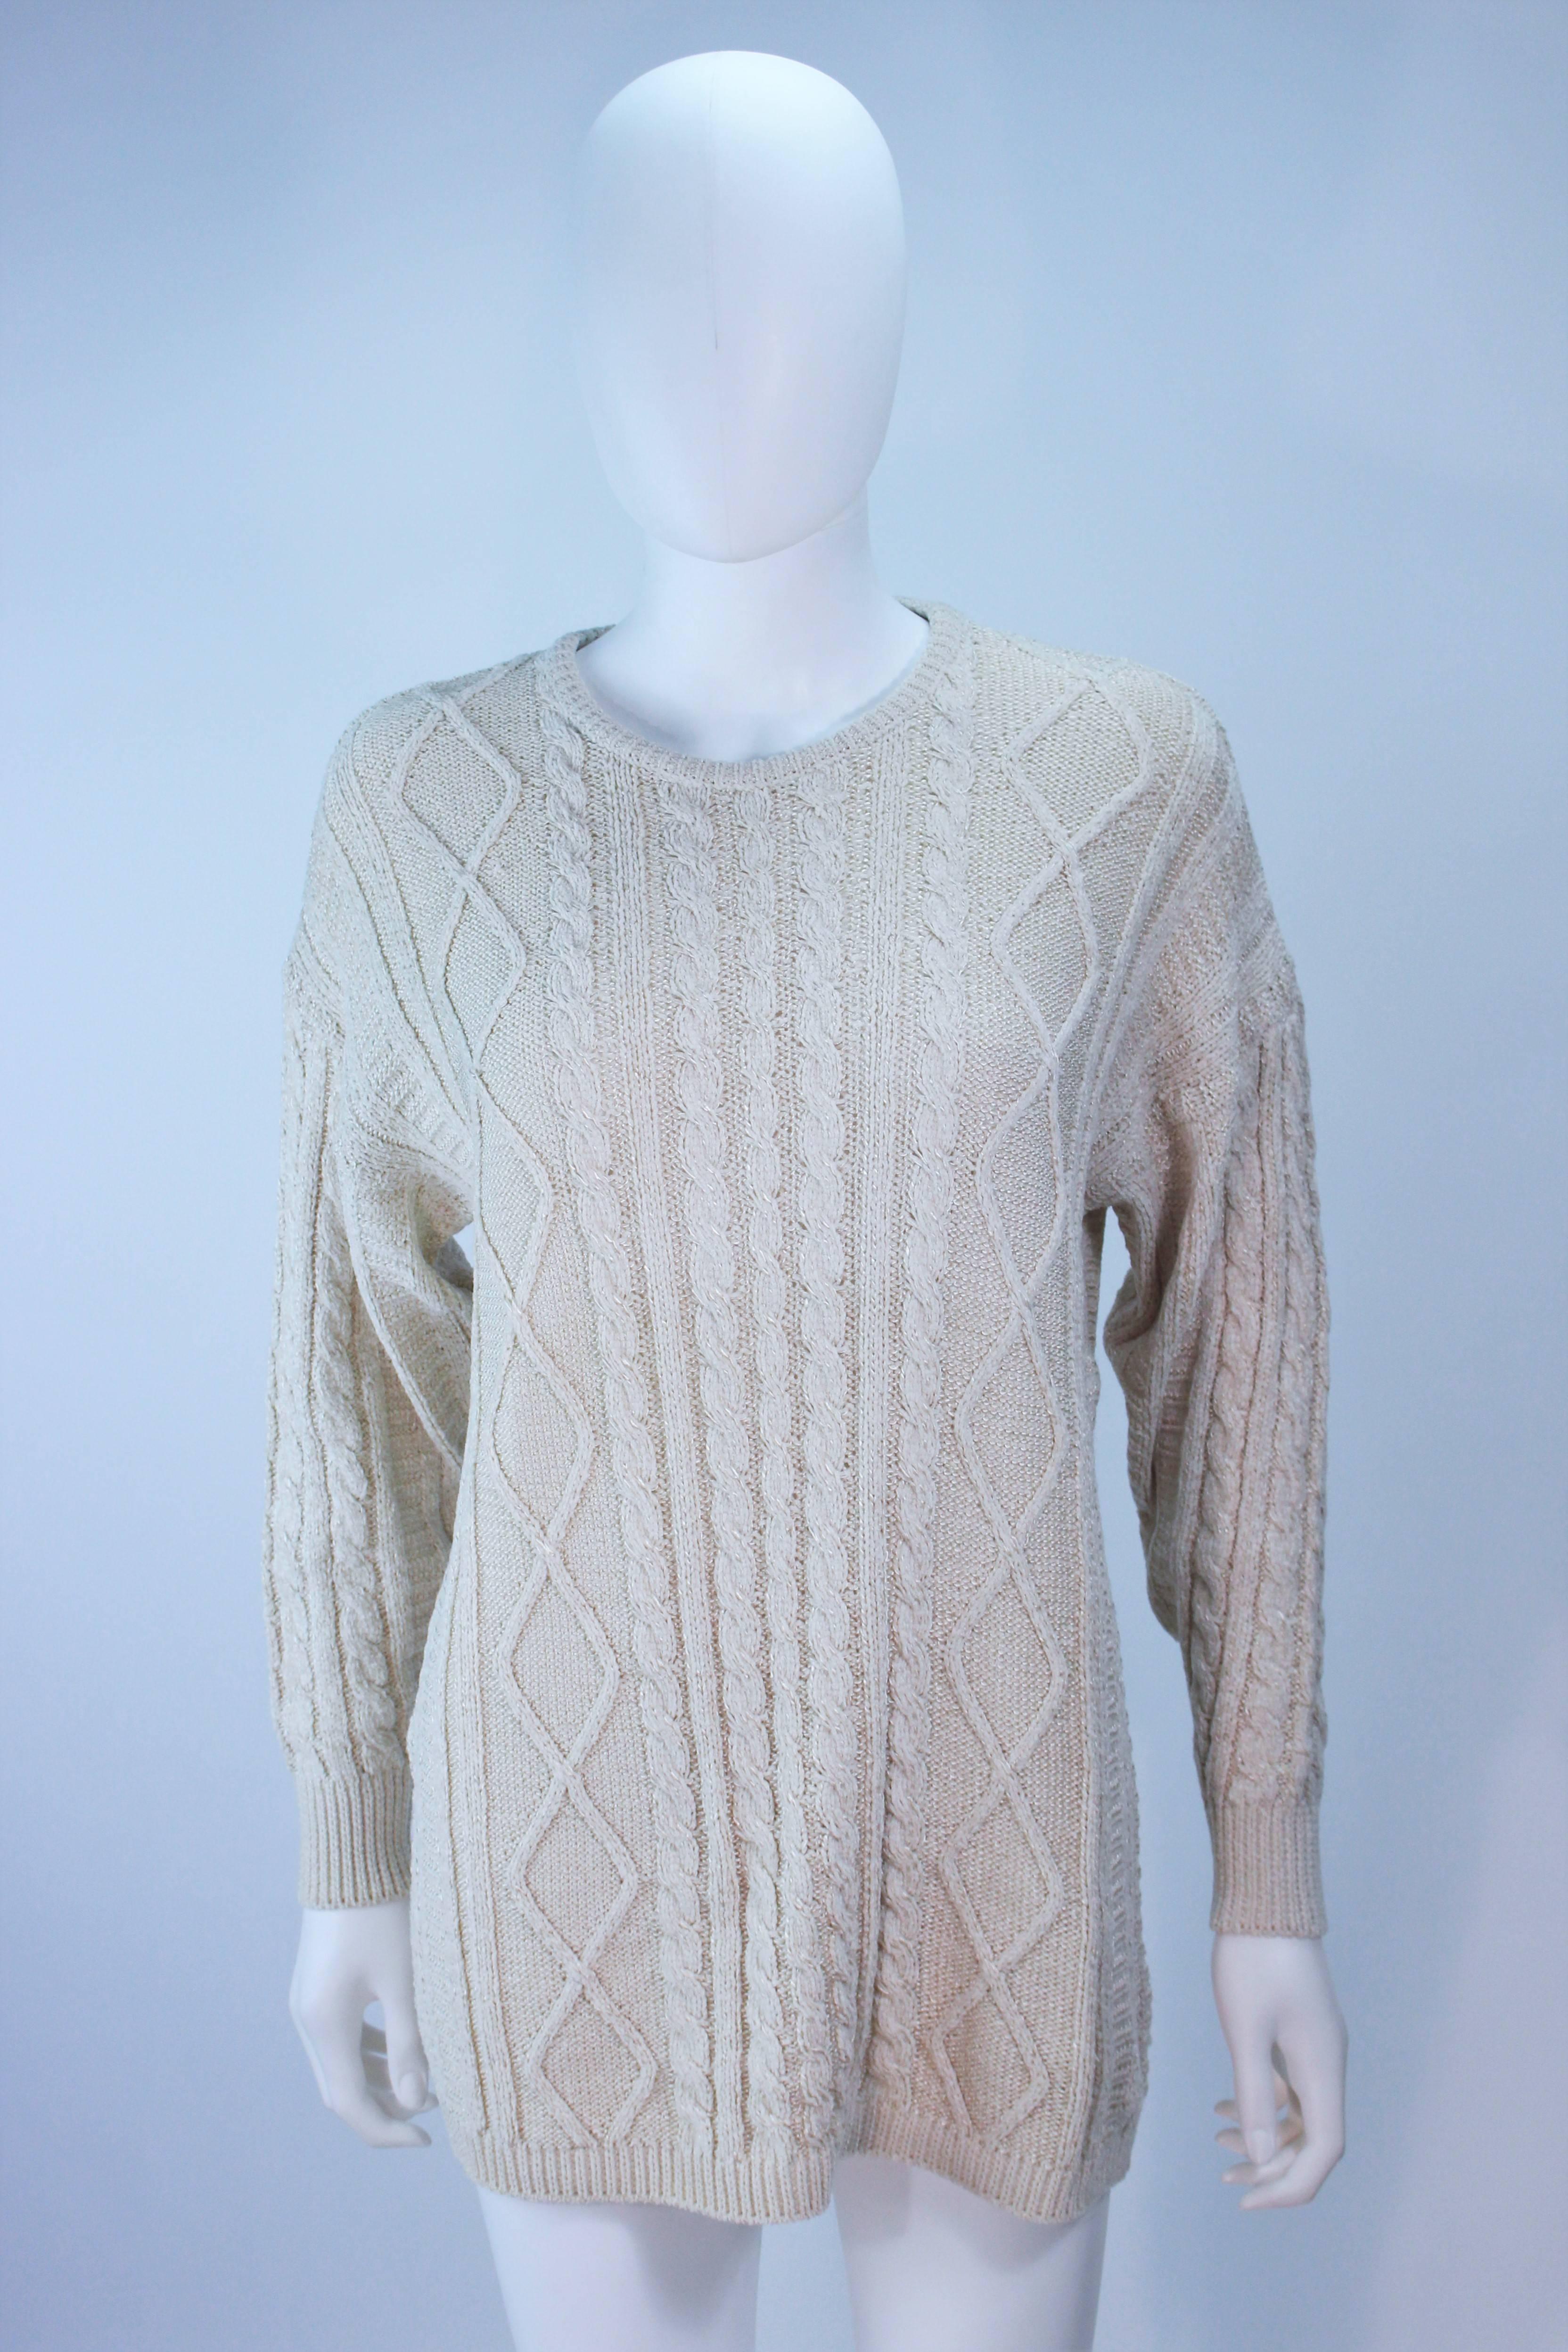 GIANNI VERSACE Cable Knit Set with Pencil Skirt Size 40 42 In Excellent Condition For Sale In Los Angeles, CA